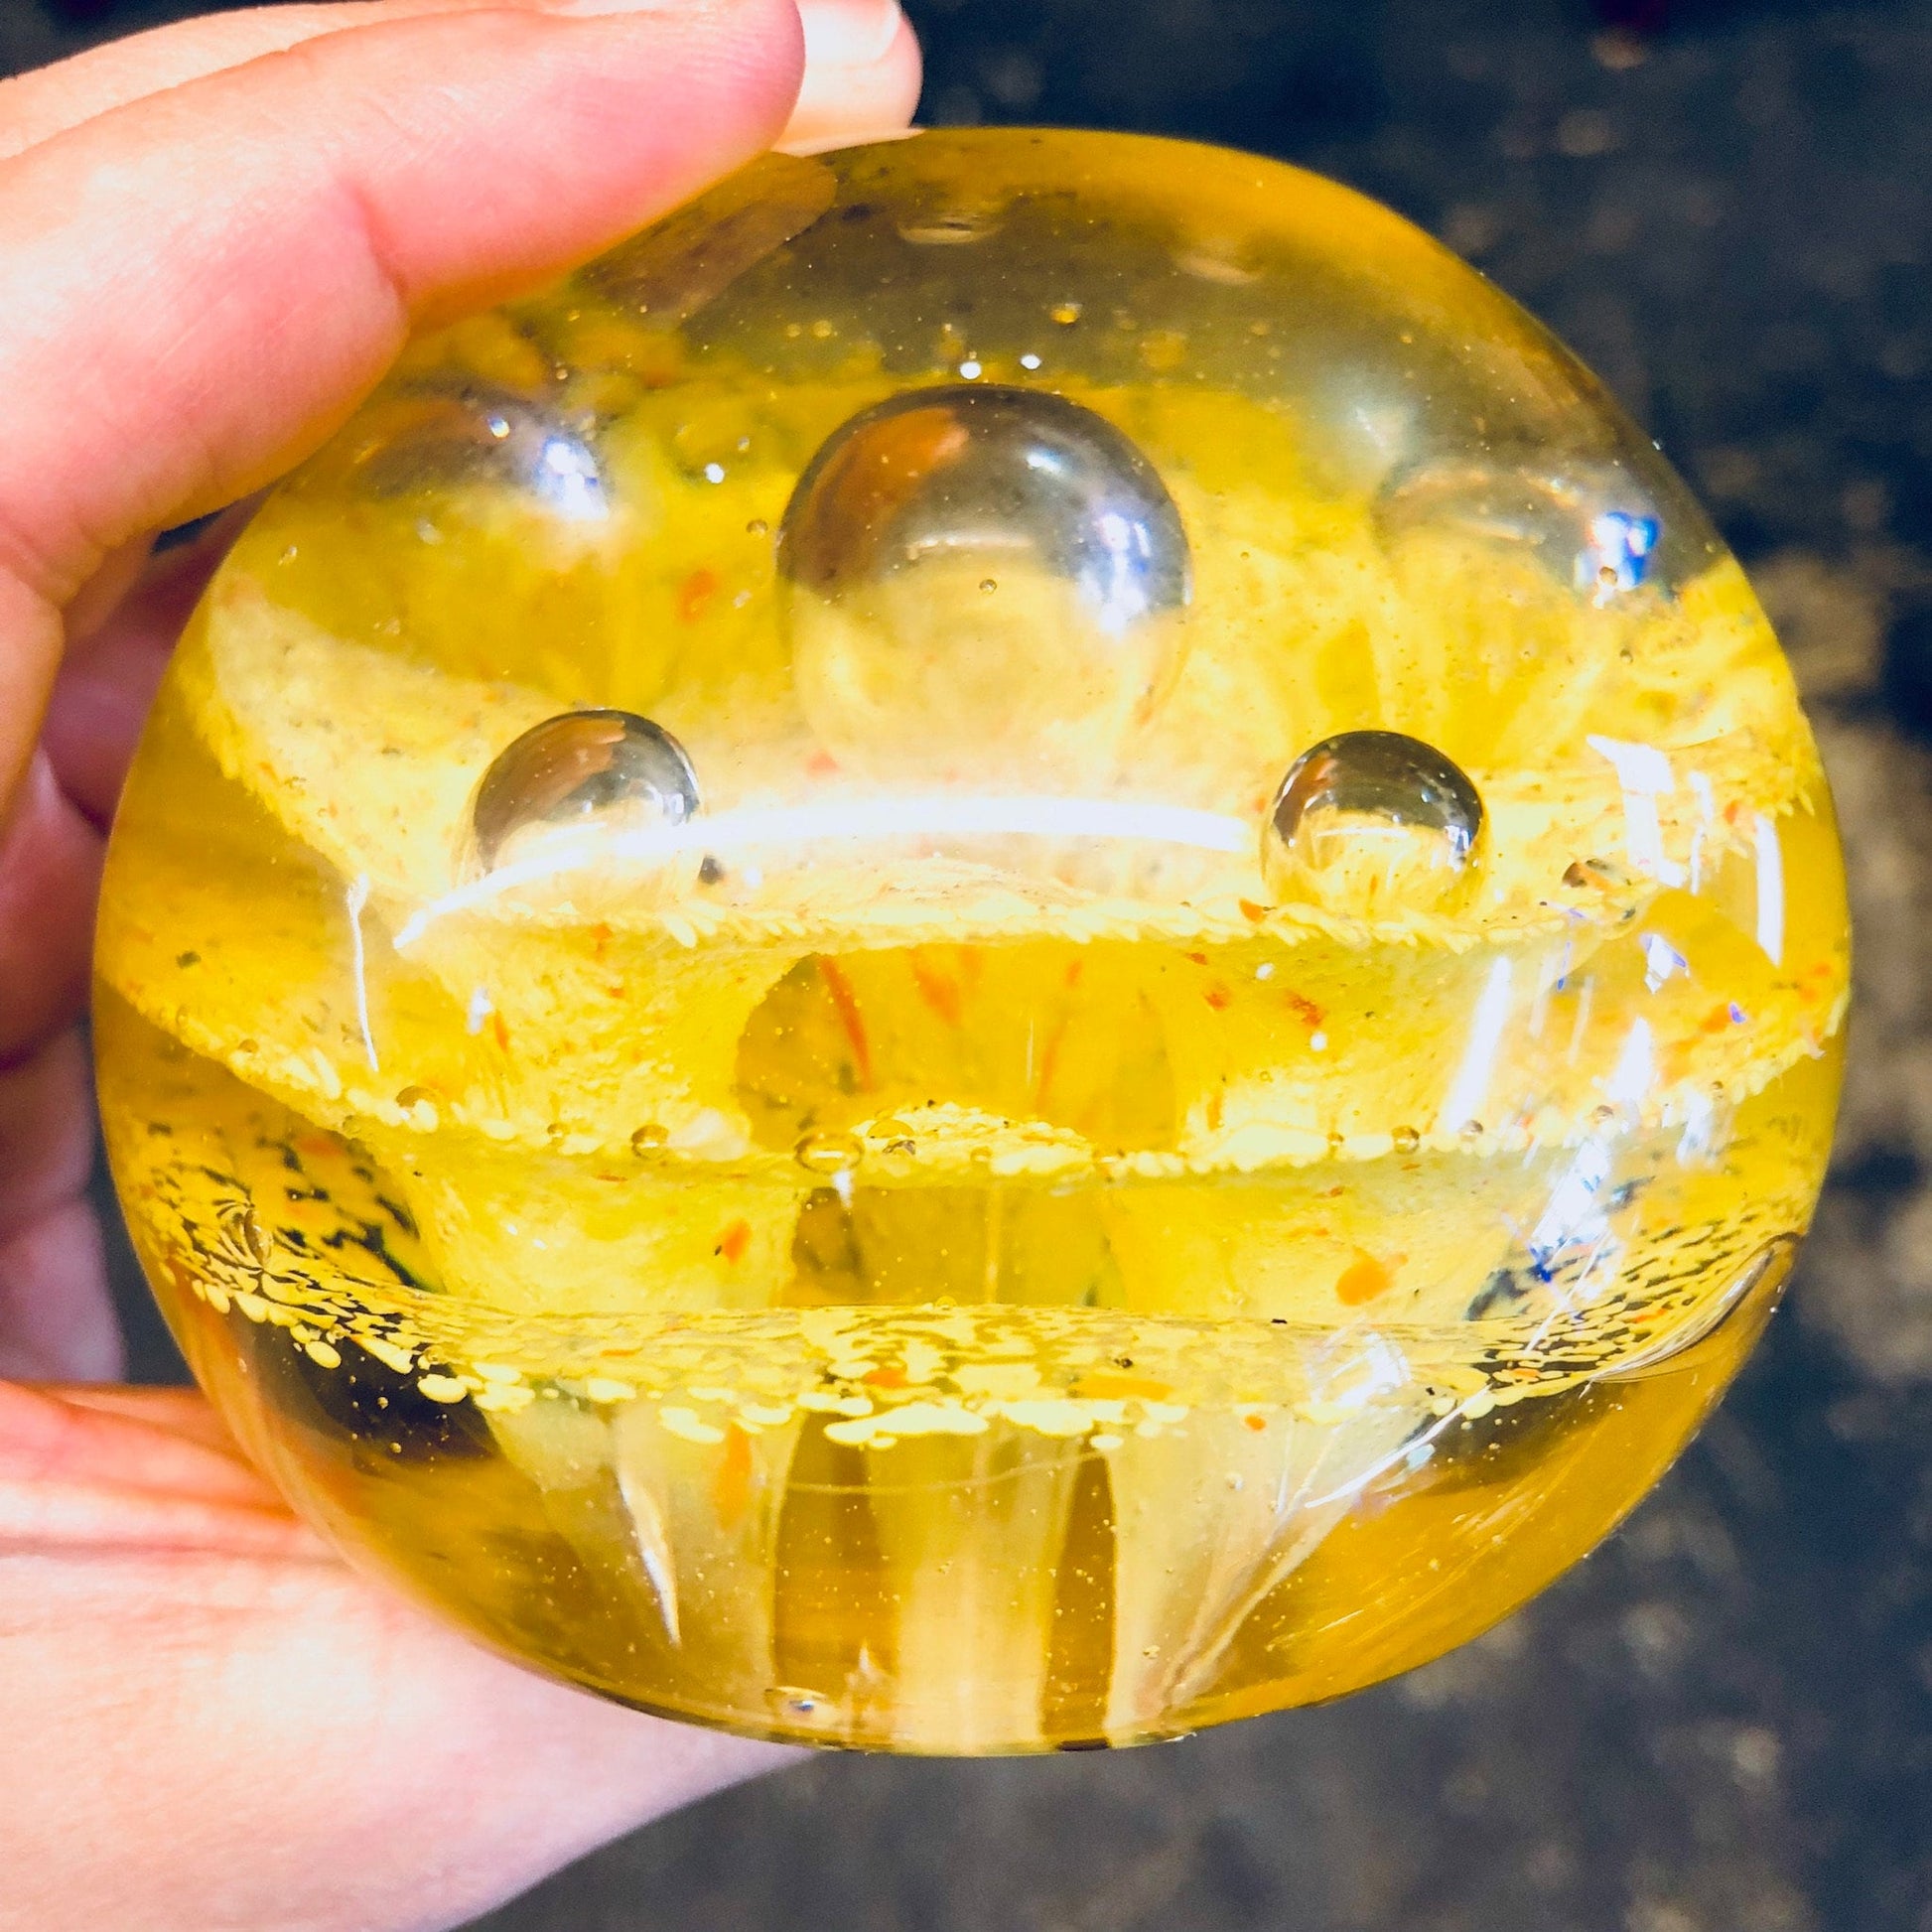 Alt: Hand holding a yellow and orange speckled glass paperweight with colorful design, ideal for vintage office decor.